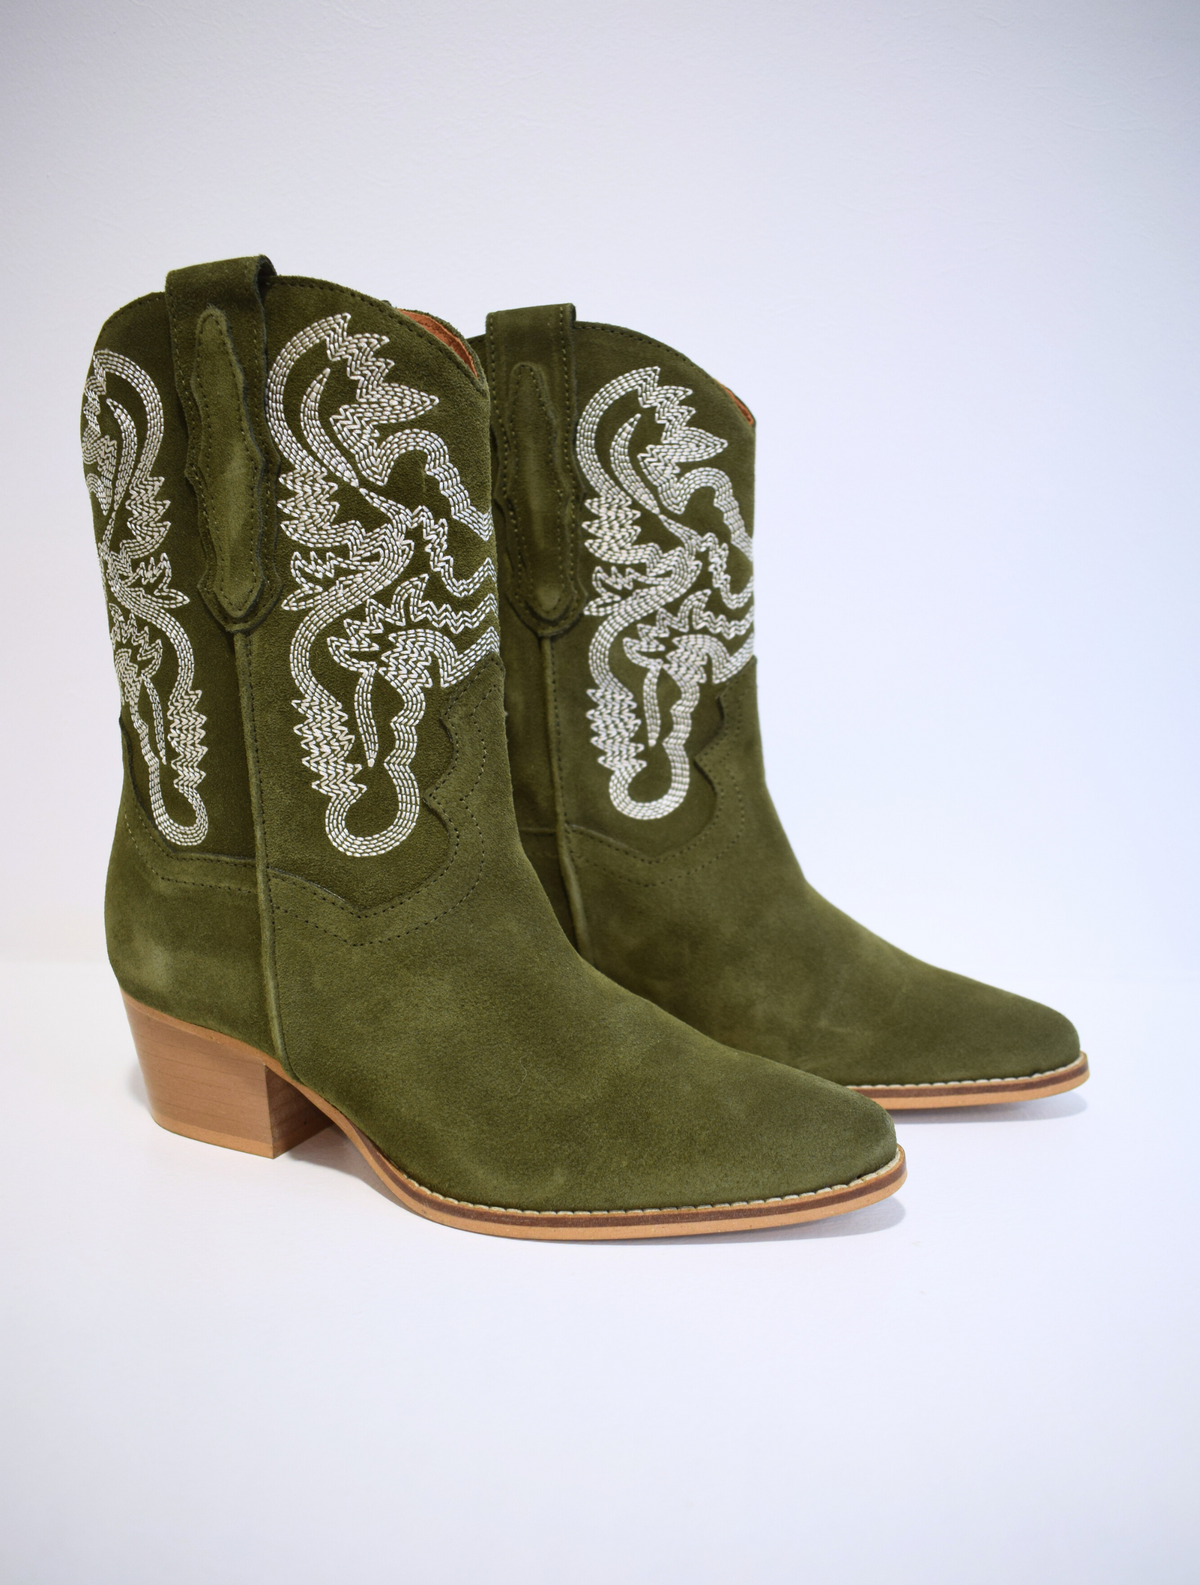 Army green cowboy boot with contrast stitching